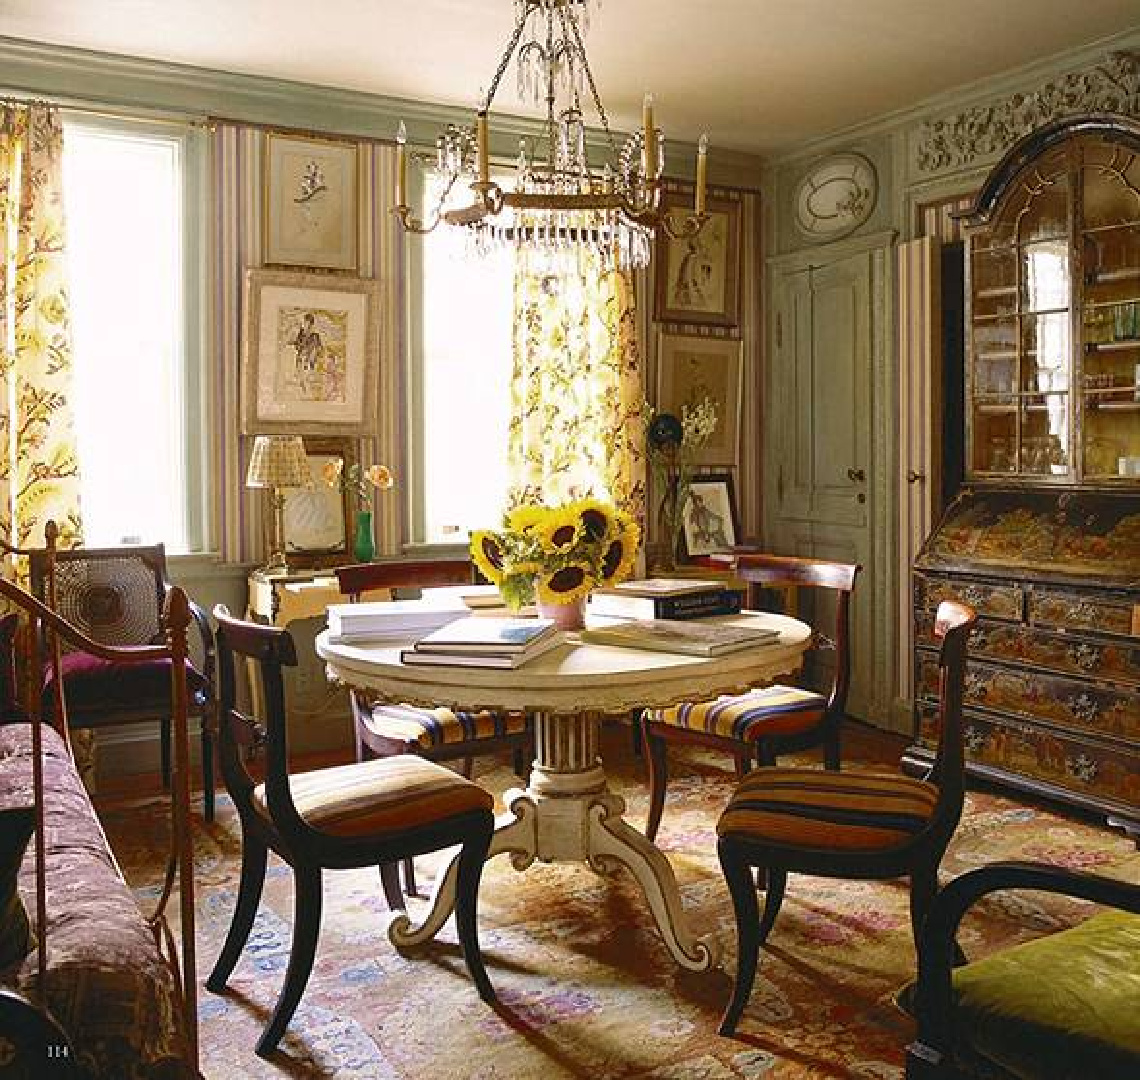 Hamish Bowles traditional dining room - Agencie Group. #europeancountry #traditionalstyle